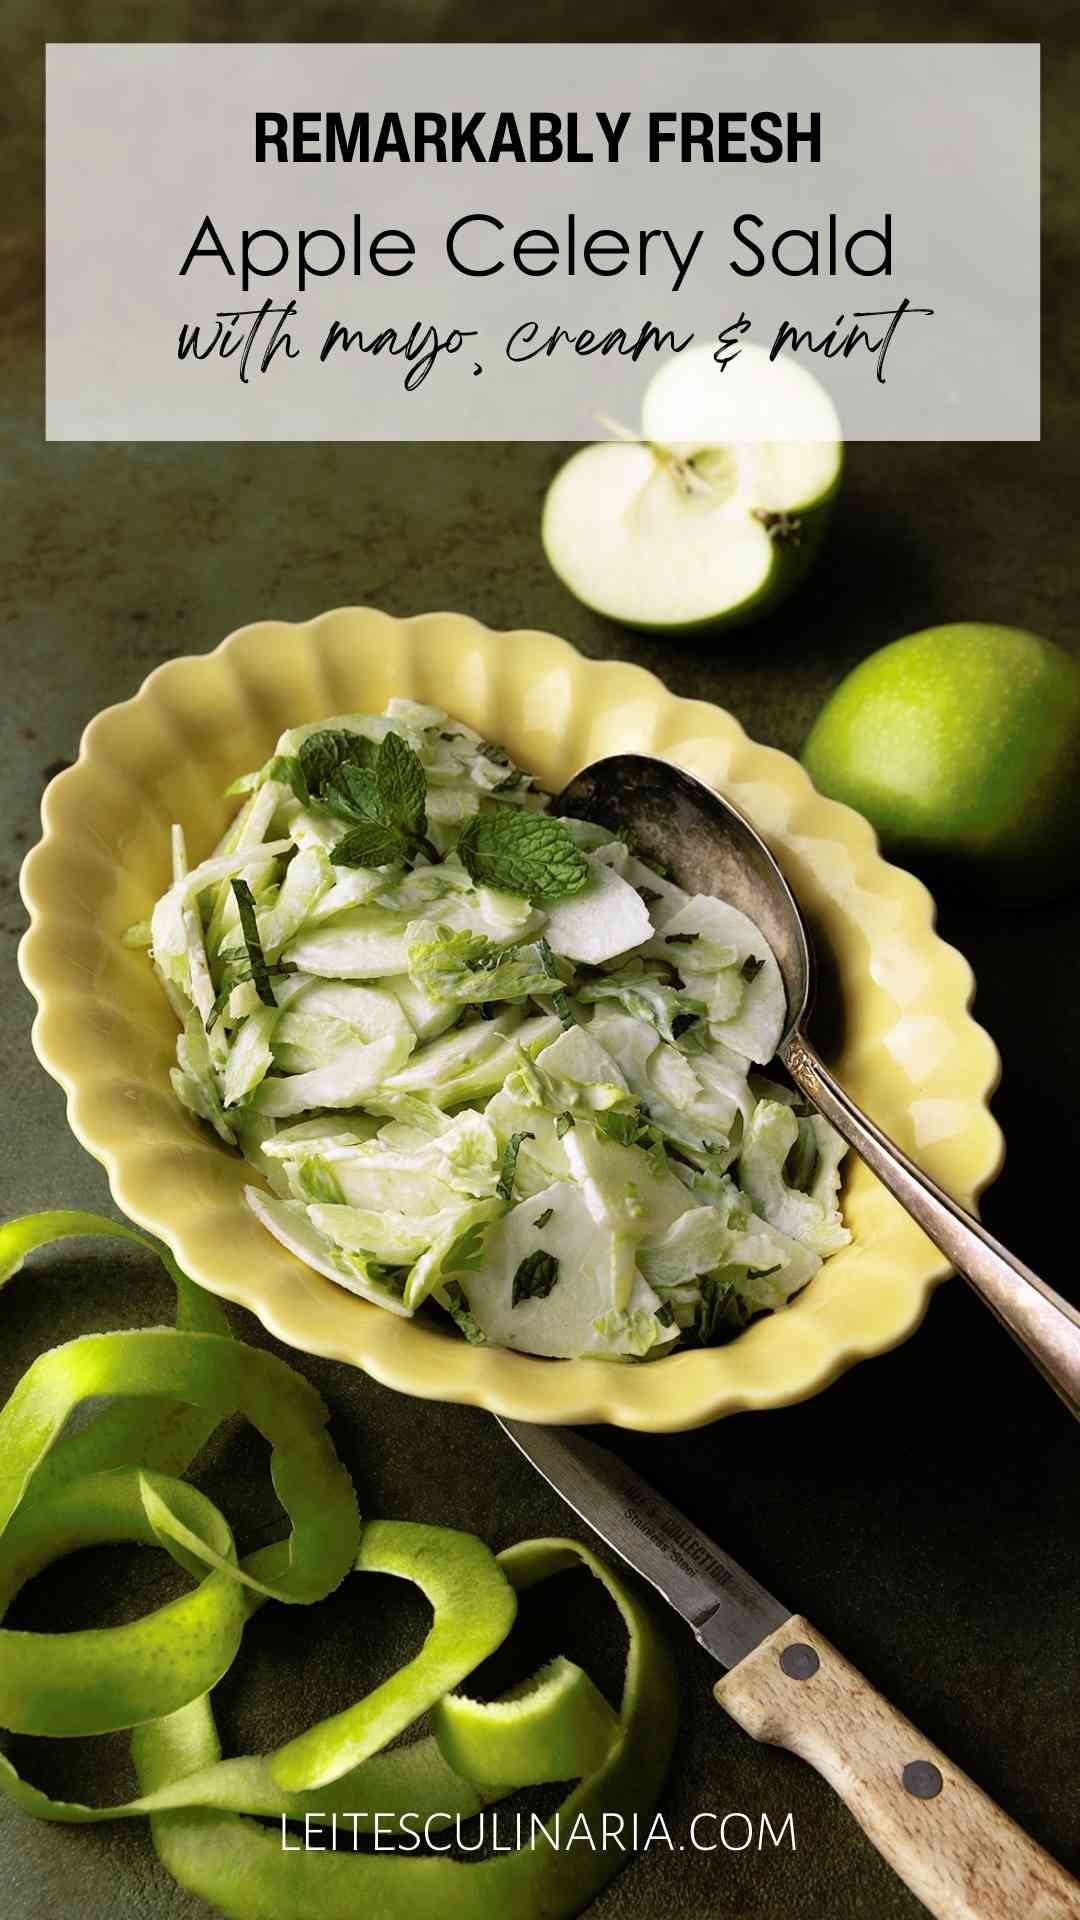 An apple and celery salad in a creamy dressing, garnished with mint leaves in a yellow scalloped bowl.